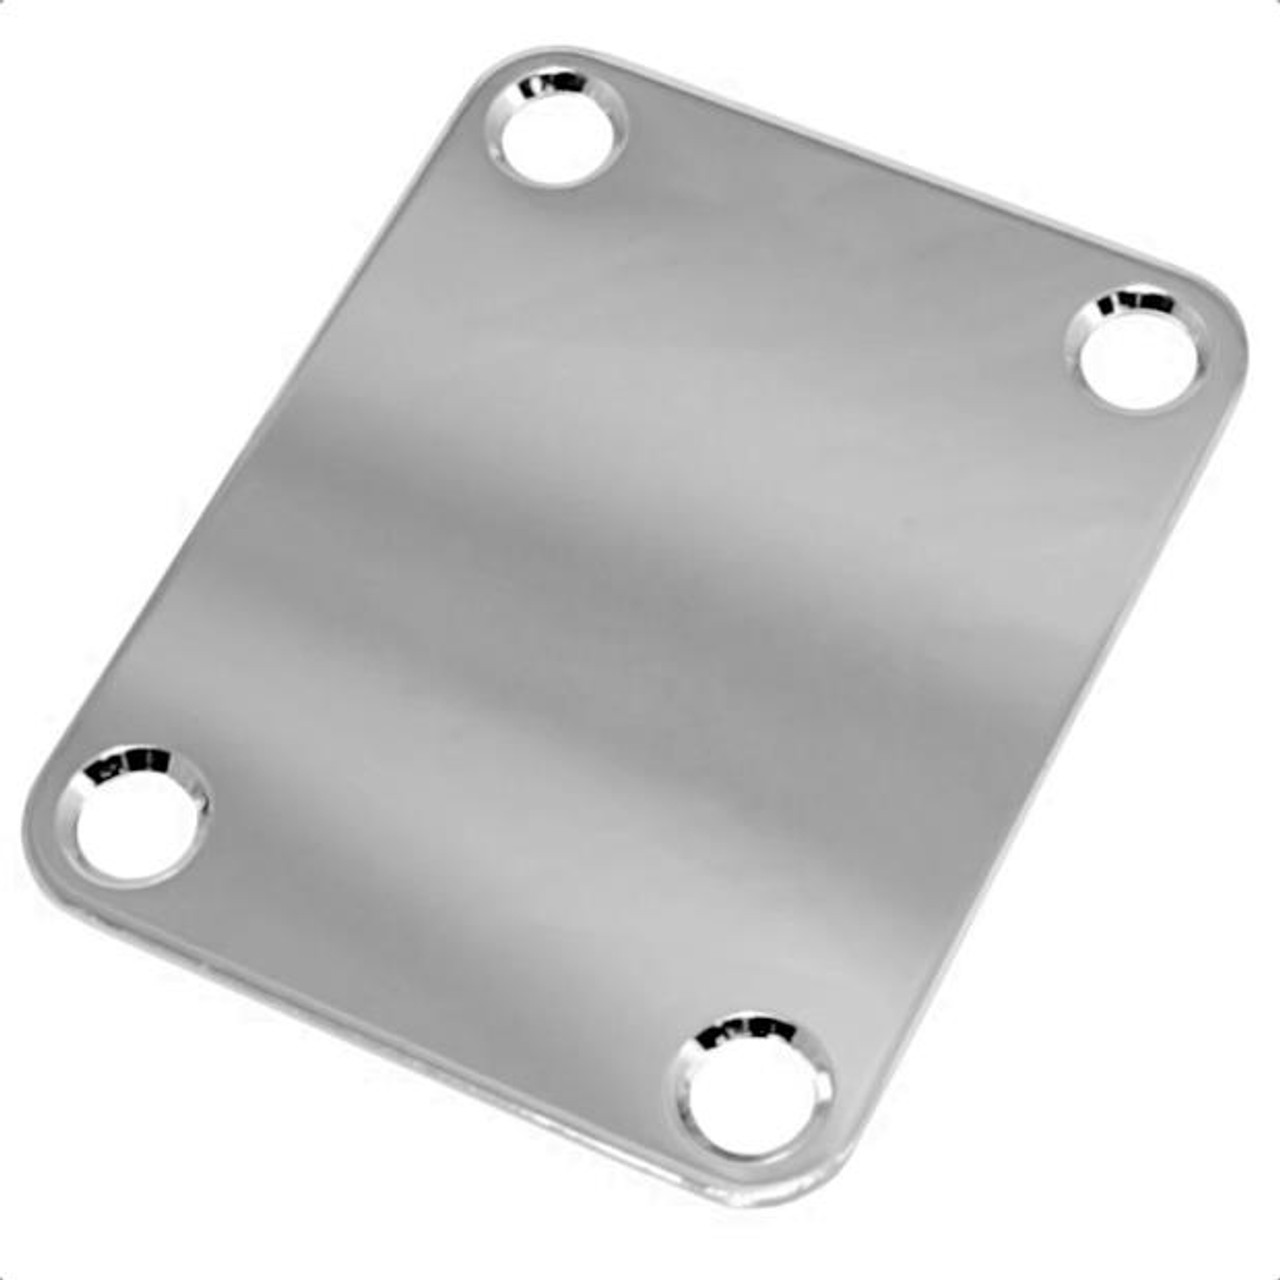  Guitar & Bass Neck Mounting Plate-Chrome